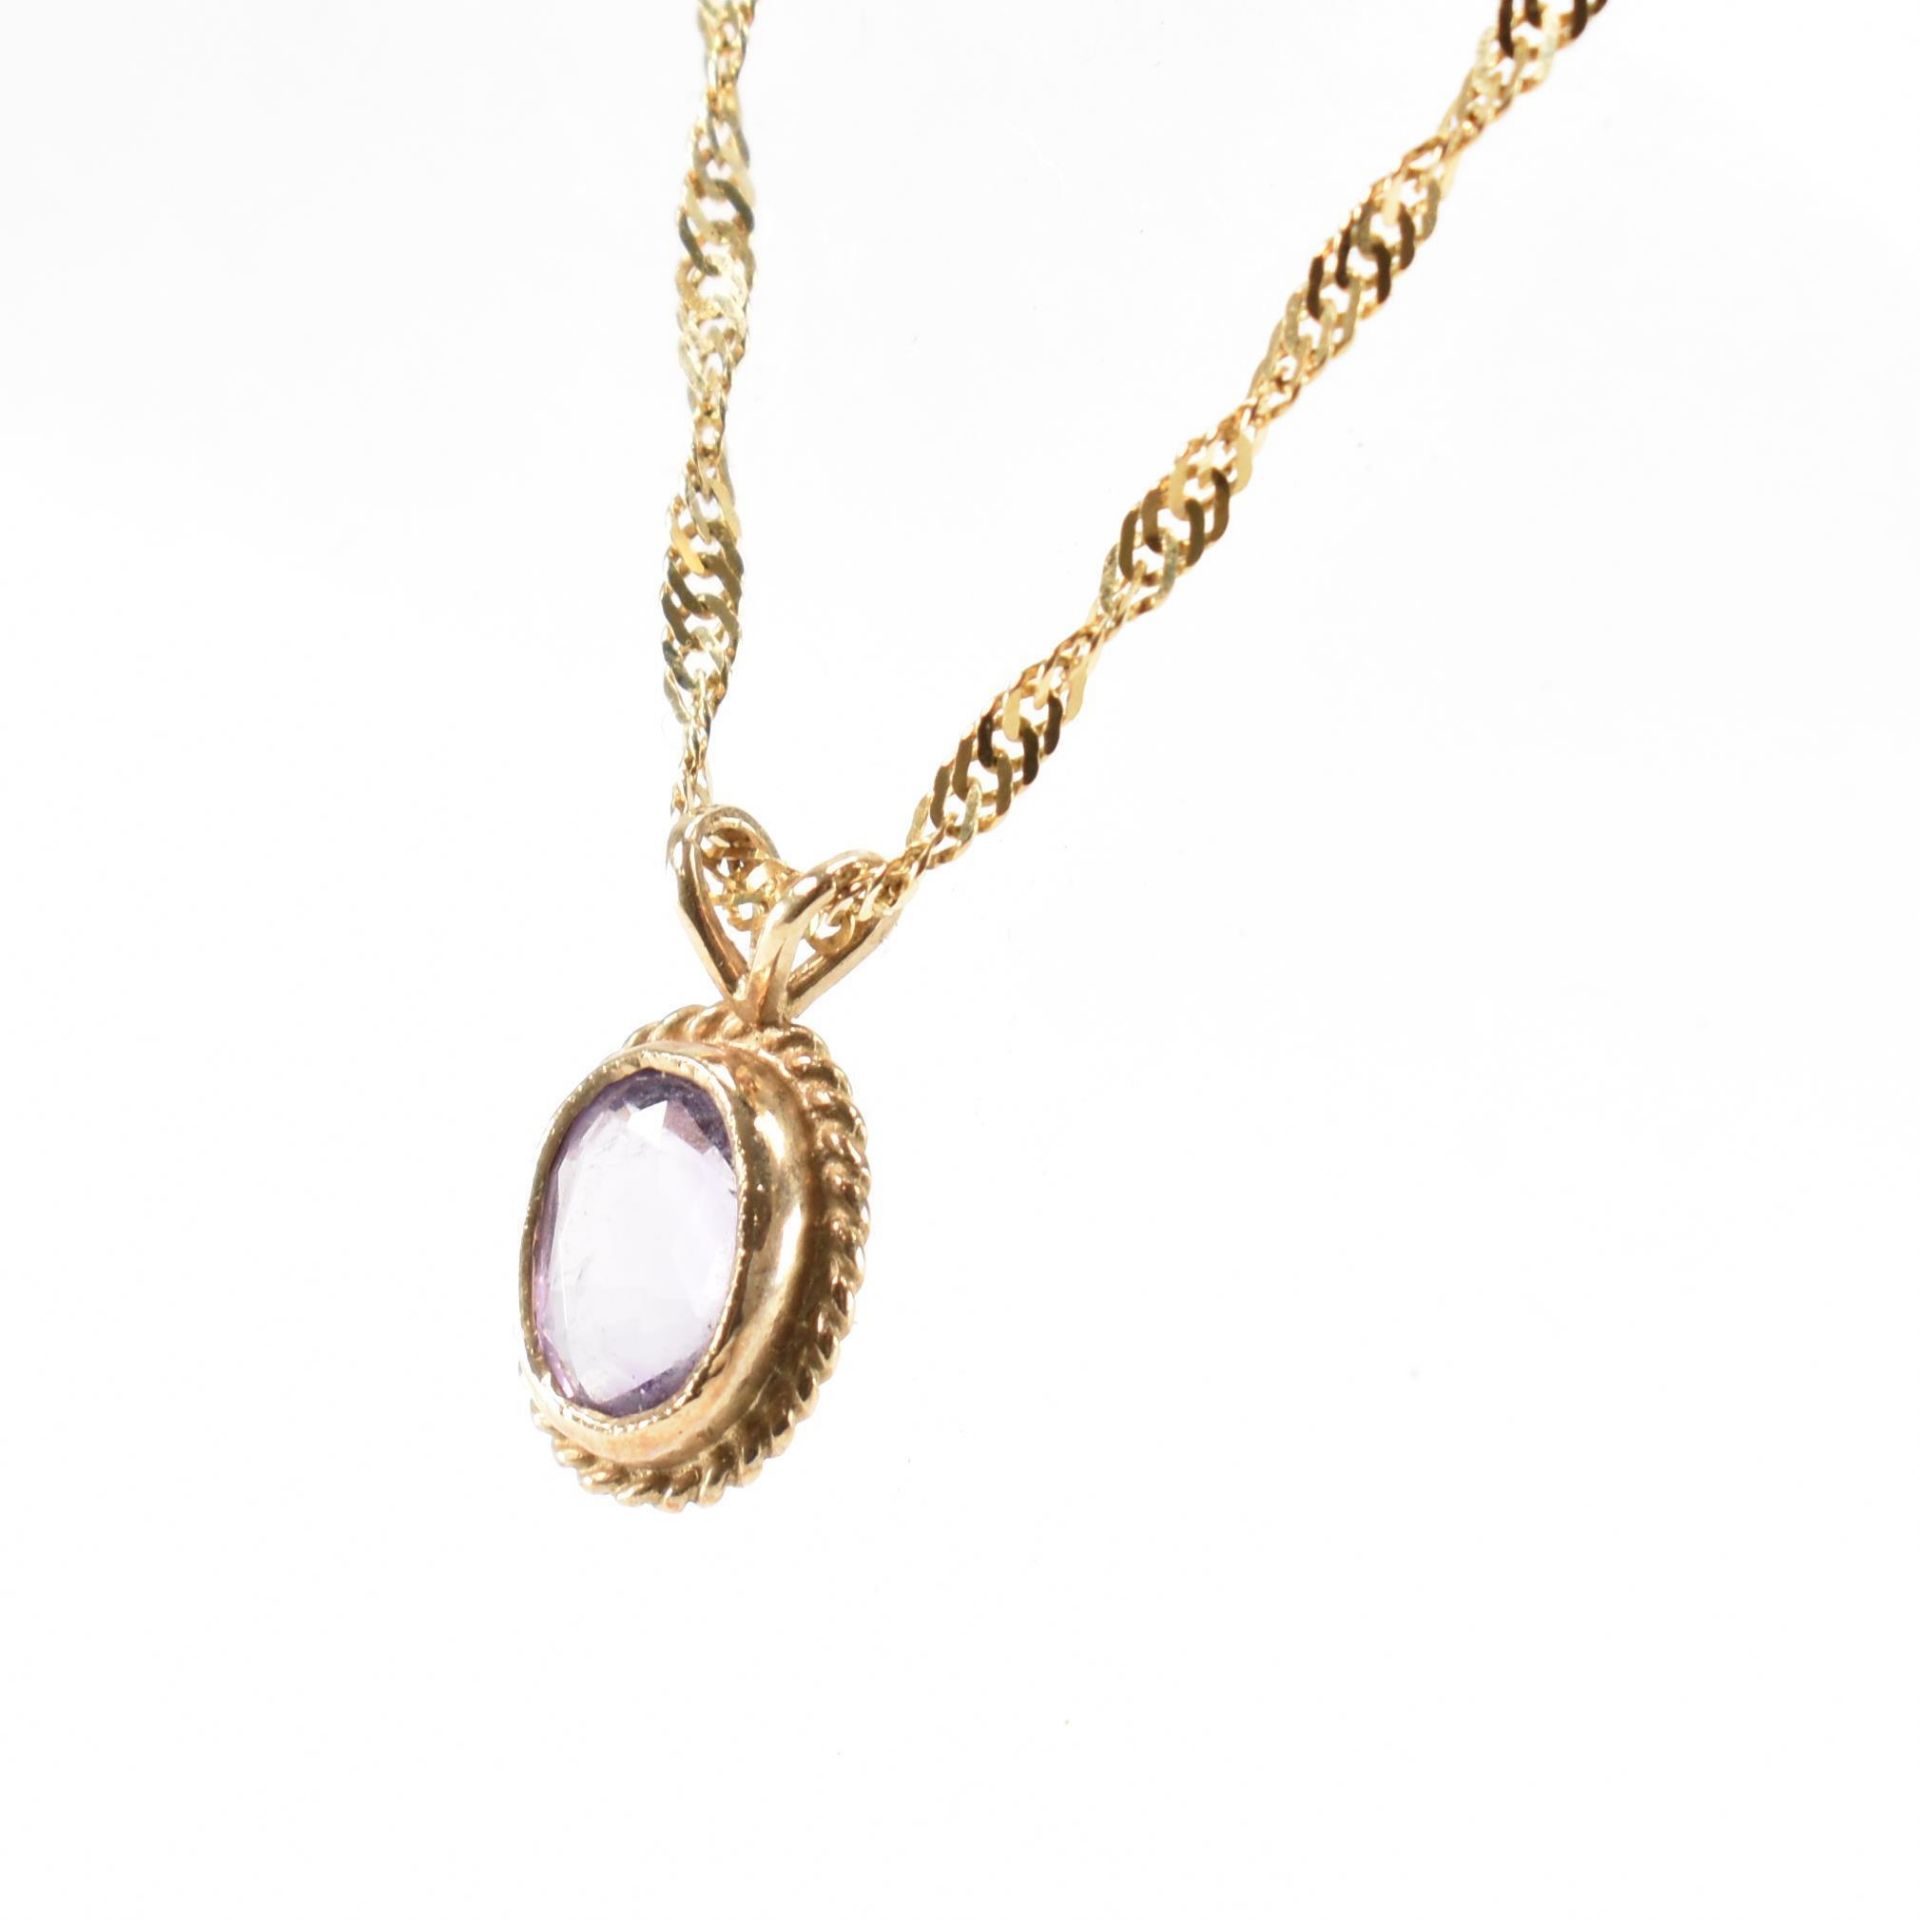 HALLMARKED 9CT GOLD & AMETHYST PENDANT NECKLACE - Image 2 of 4